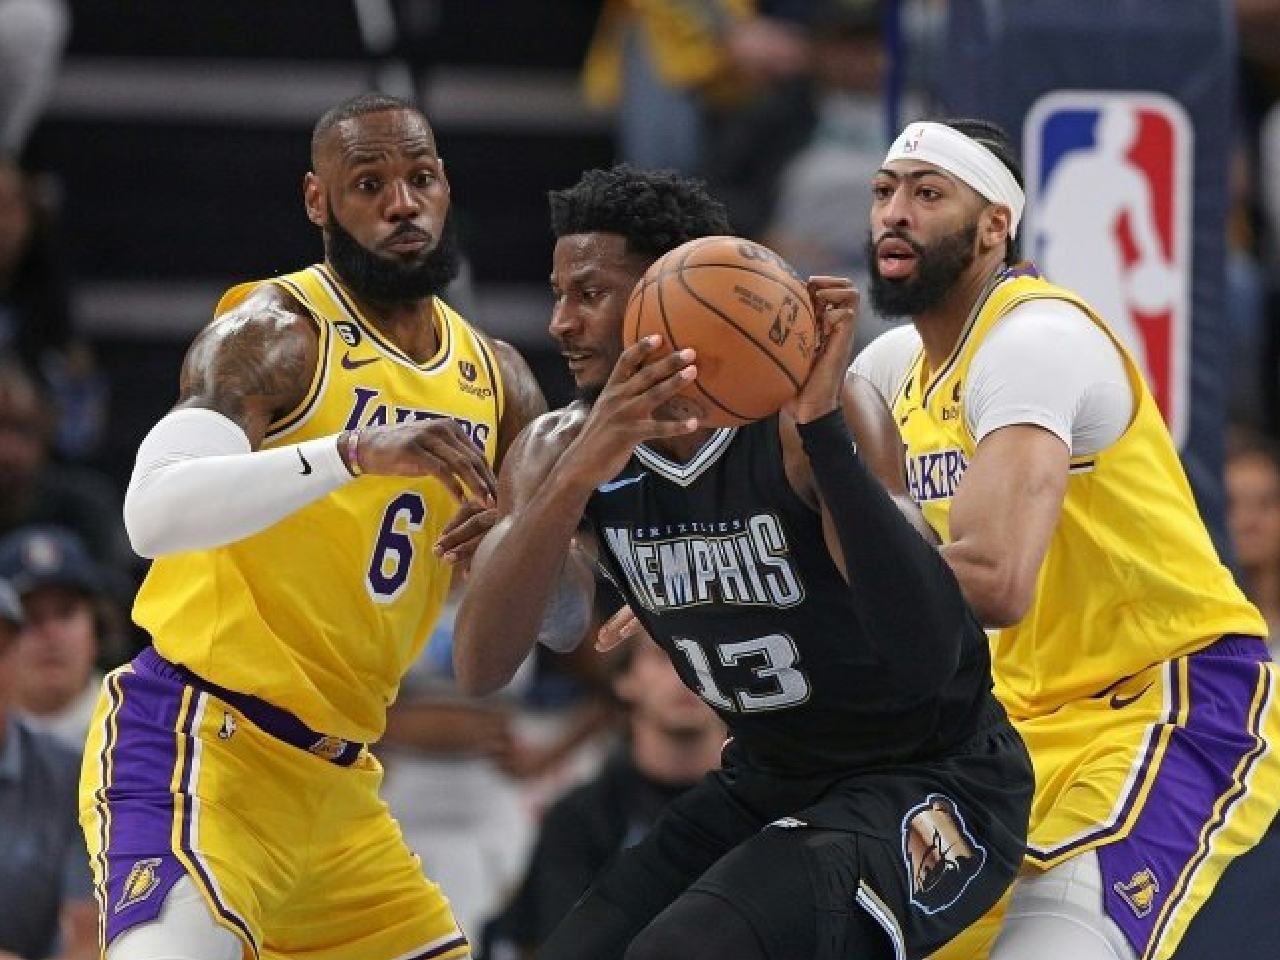 Grizzlies hold off Lakers to level series 1-1